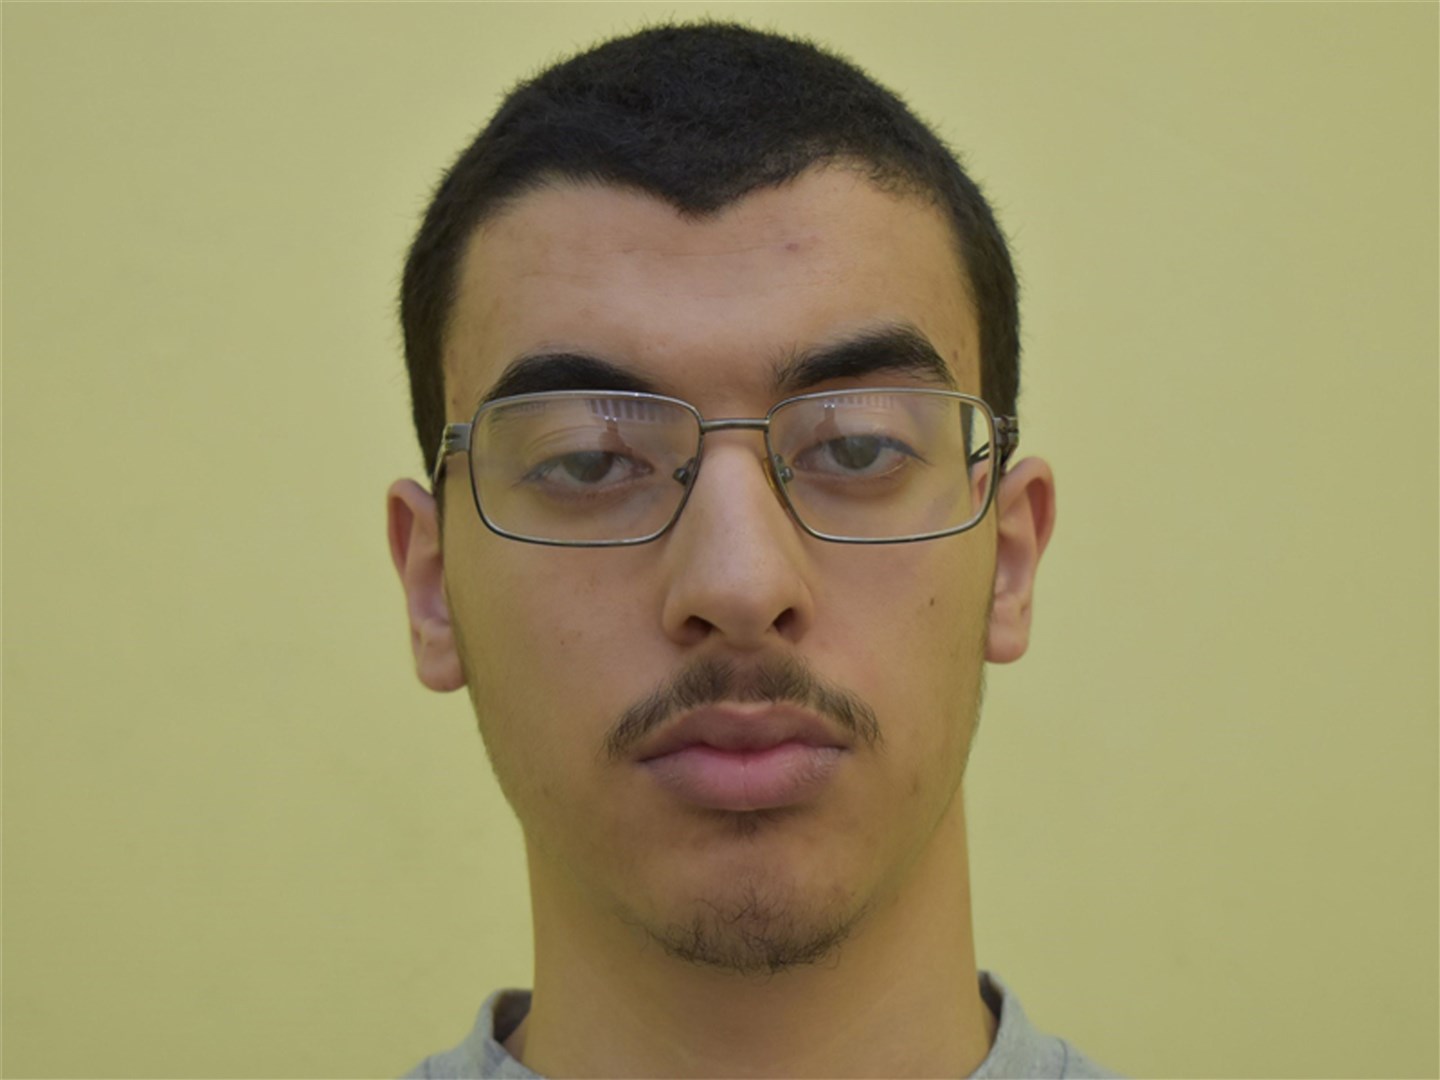 Hashem Abedi, the younger brother of Manchester Arena bomber Salman Abedi, was convicted of 22 counts of murder (Greater Manchester Police/PA)